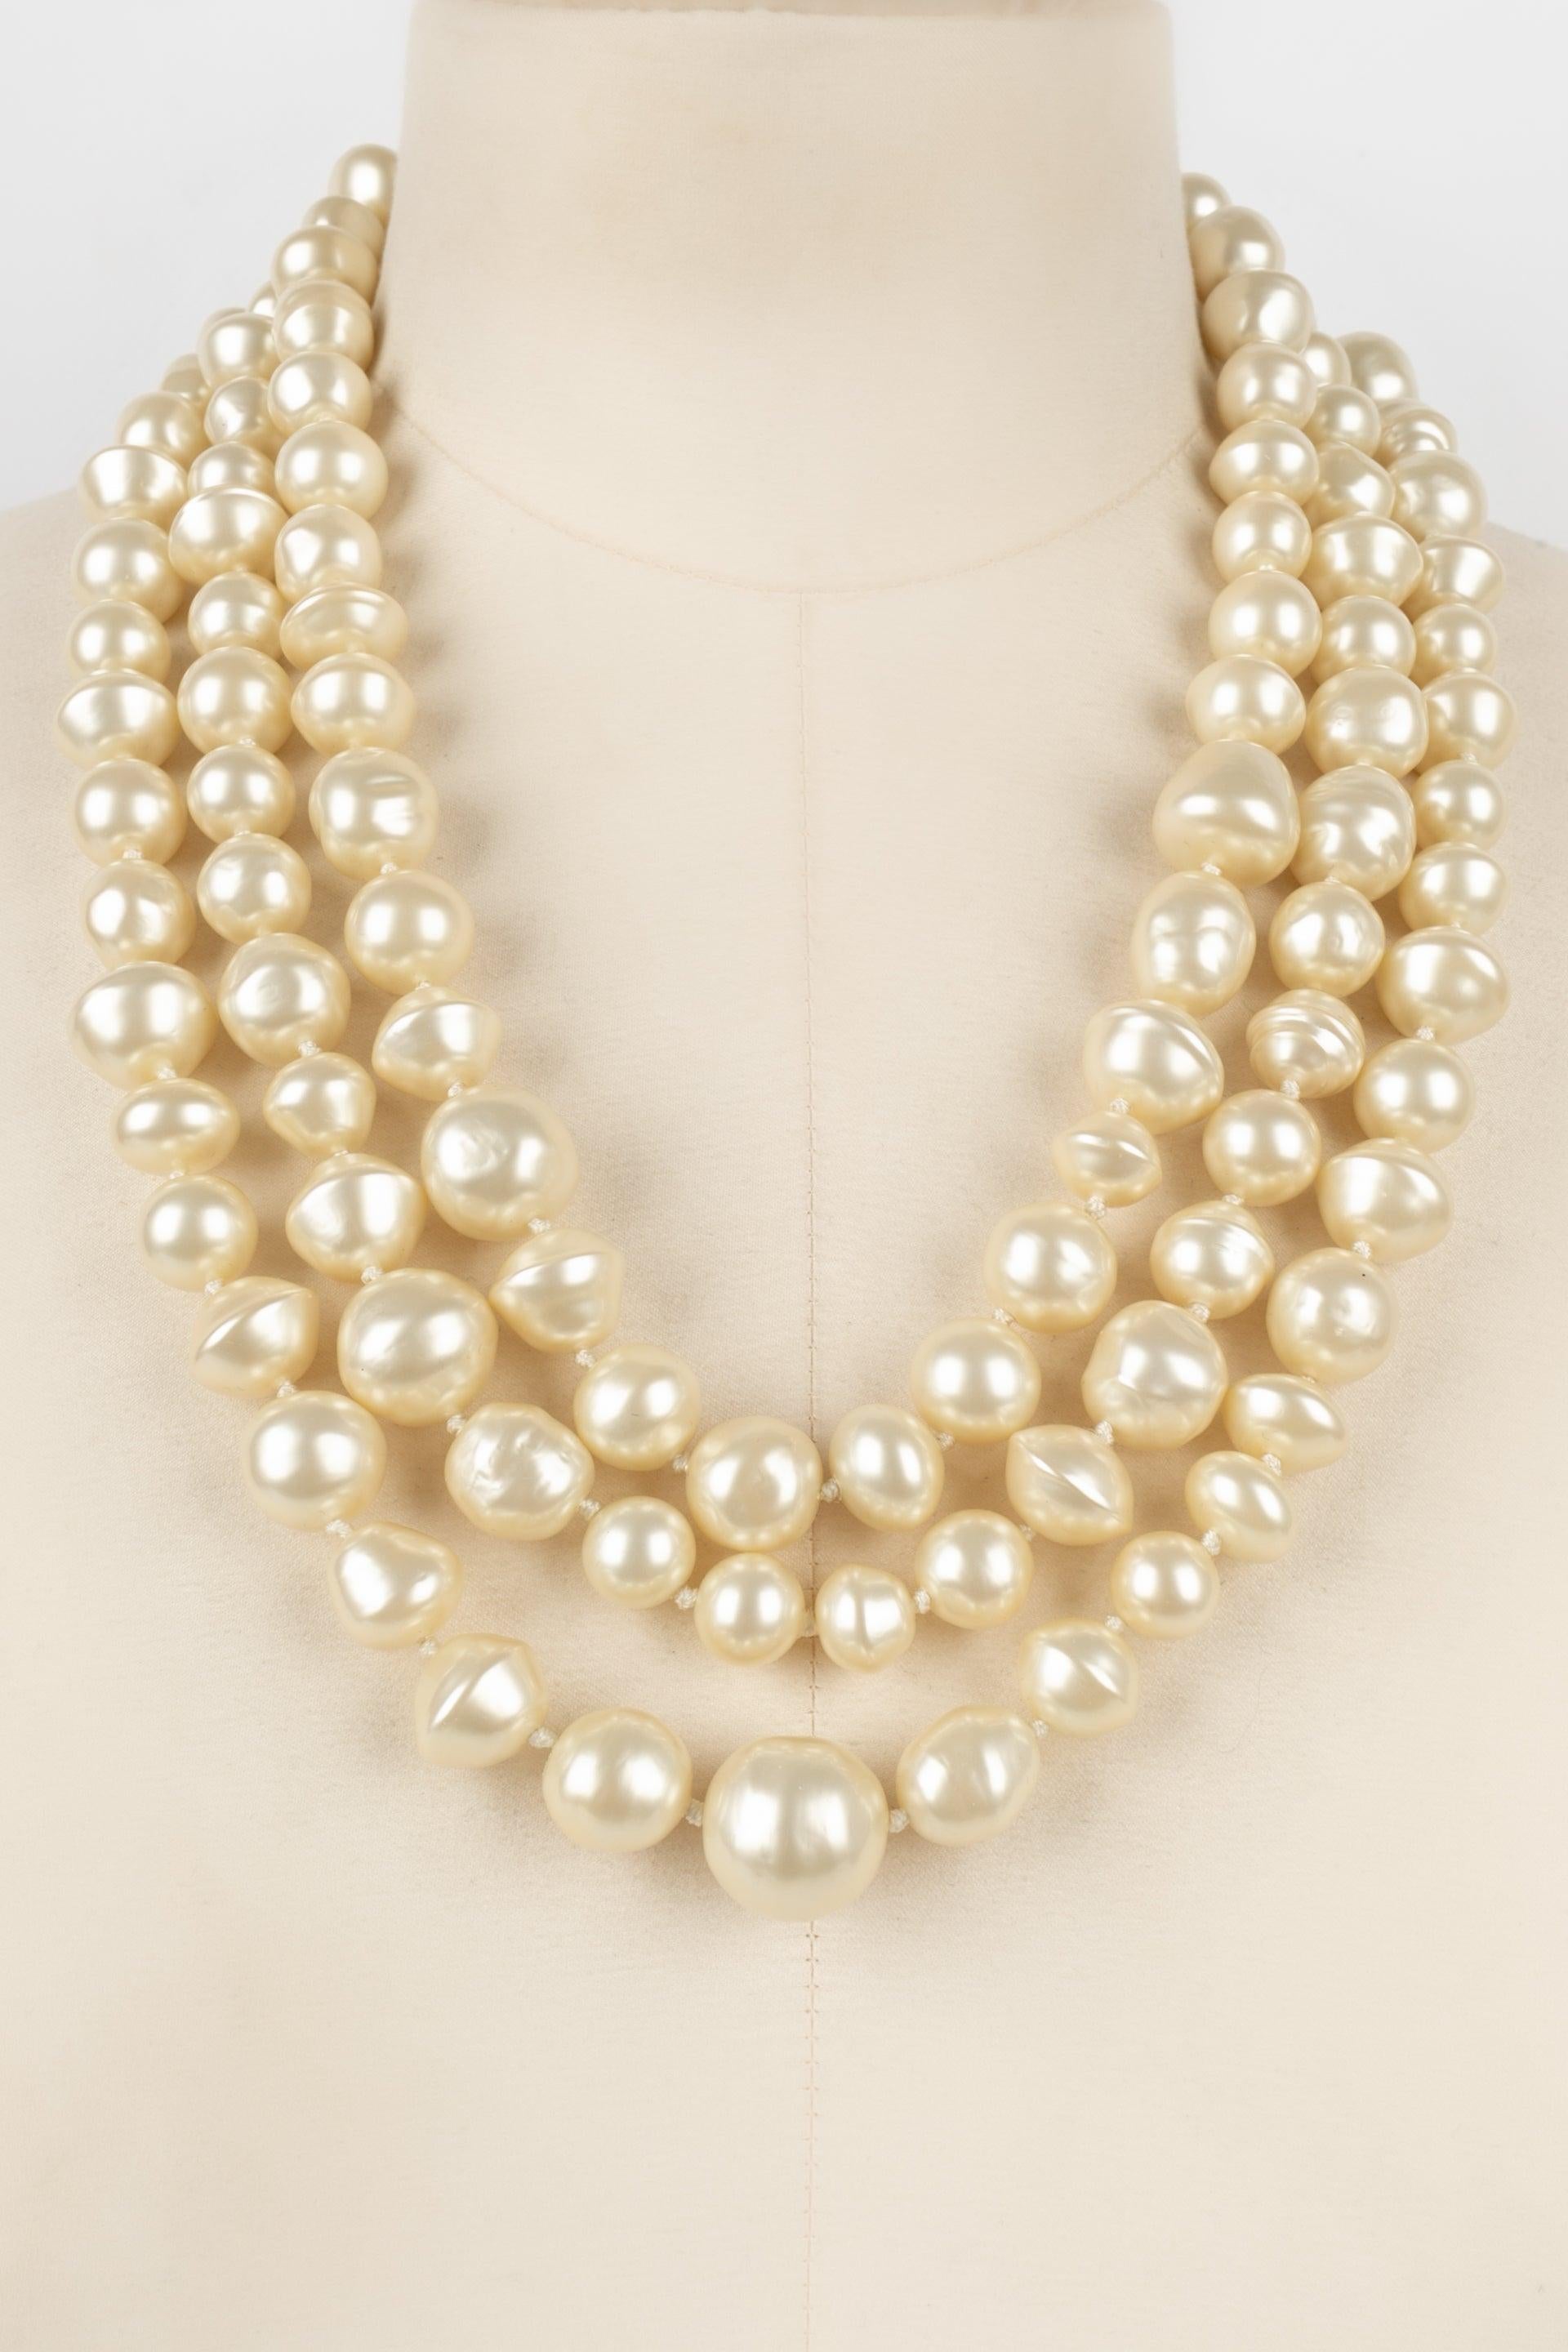 Chanel - (Made in France) Three-row necklace with costume pearls assembled with knots.

Additional information:
Condition: Very good condition
Dimensions: Length of the shorter row: from 54 cm to 60 cm

Seller Reference: CB238